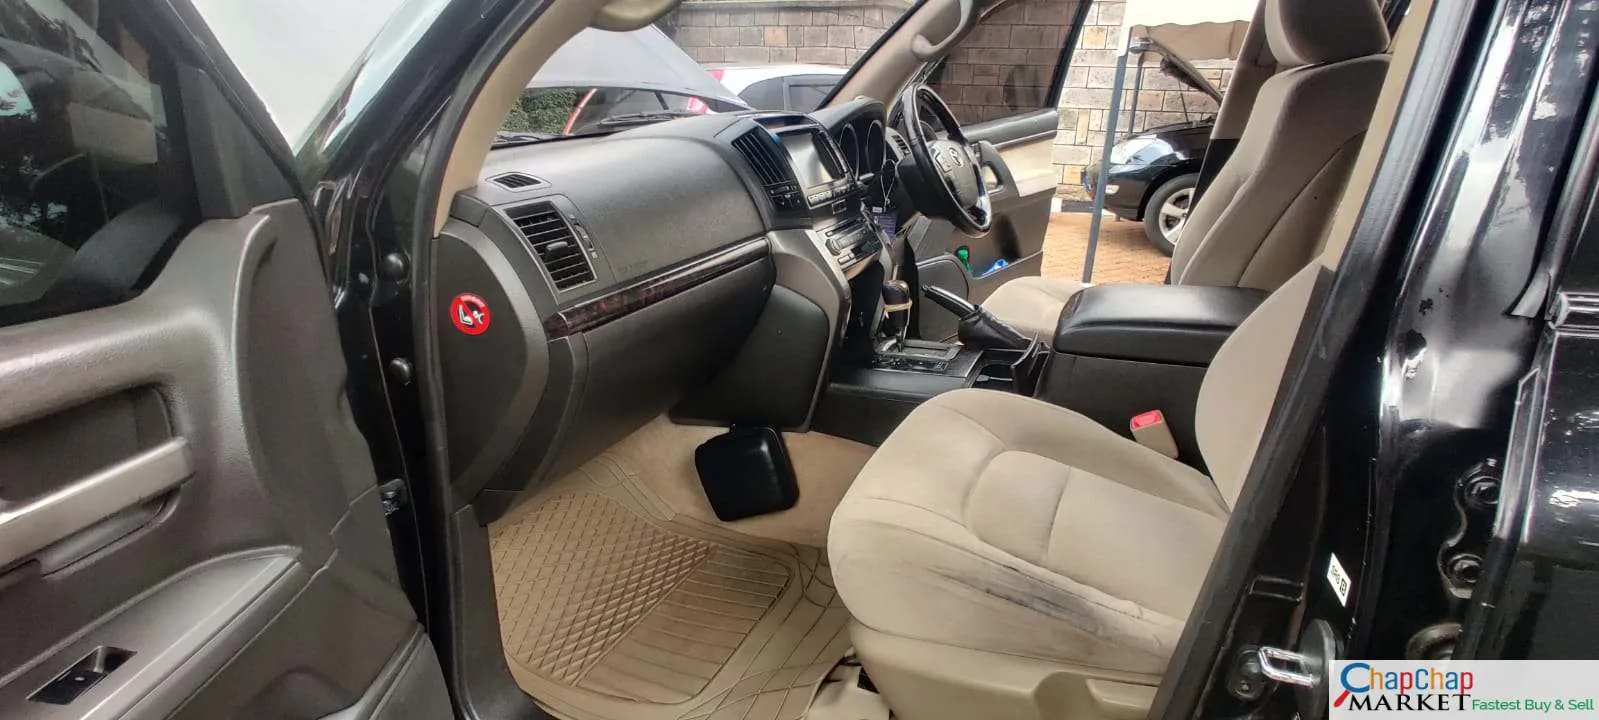 Toyota Land cruiser V8 for sale in Kenya 200 series KCA 2.9M ONLY TRADE IN OK EXCLUSIVE (SOLD)